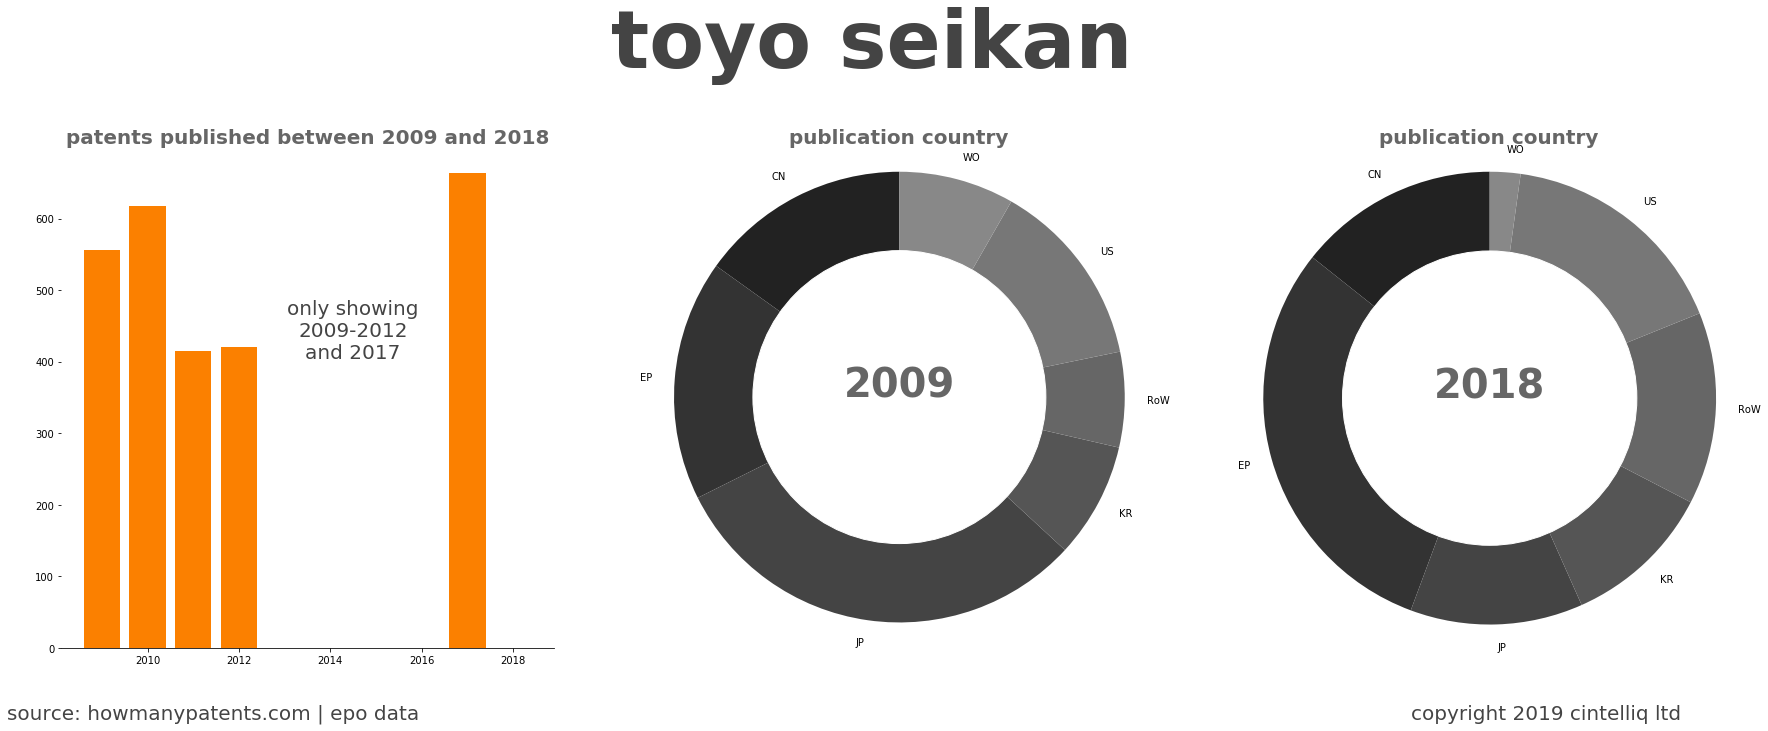 summary of patents for Toyo Seikan